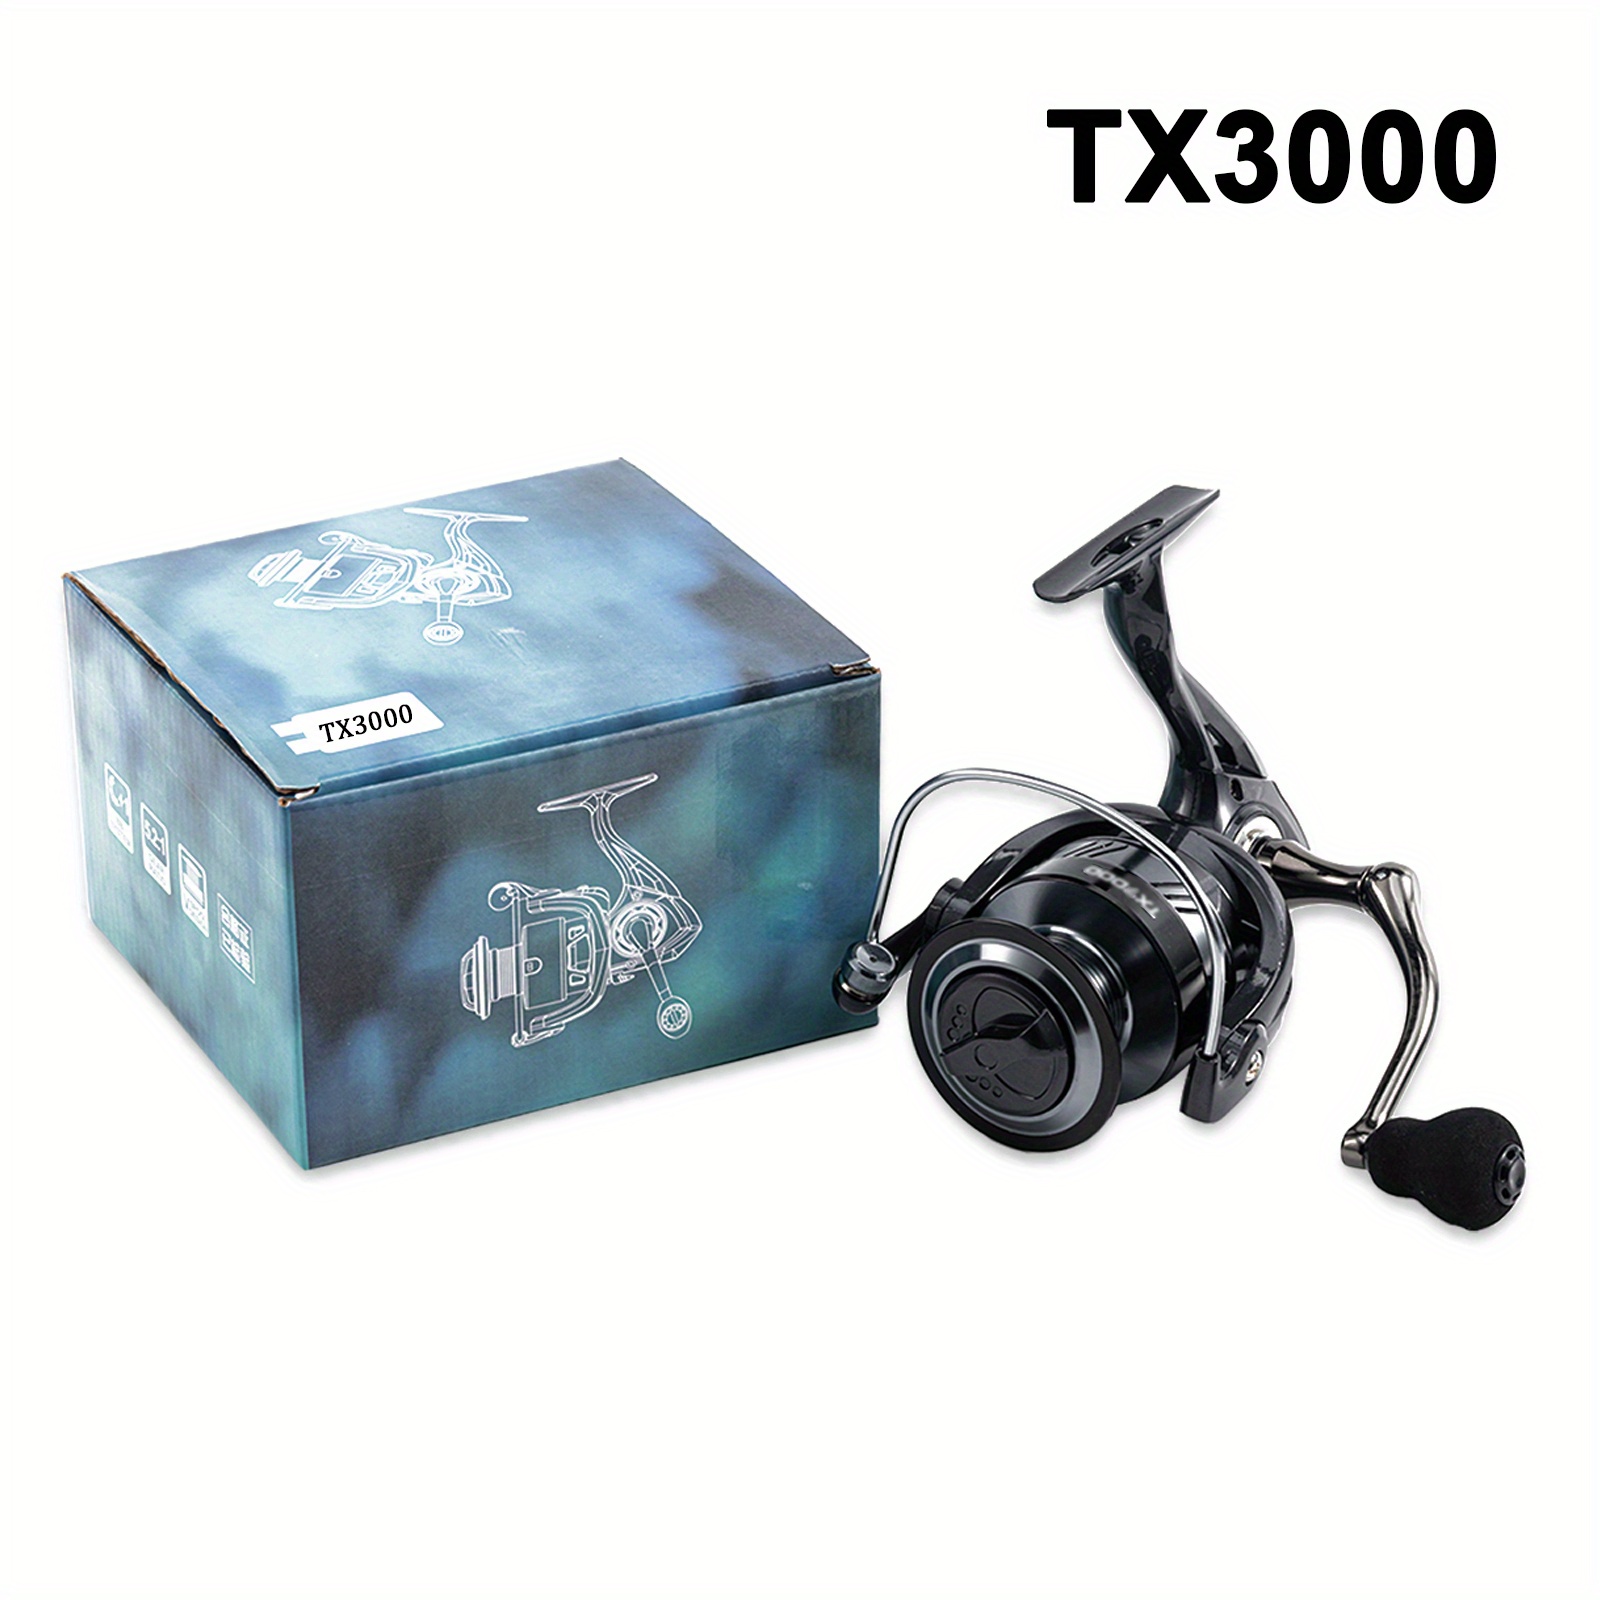 1pc TX2000-7000 Spinning Reel High-Strength Nylon Frame With EVA Gourd  Grip, 12 Bearings 5.2:1 Gear Ratio 6/8KG Max Drag, Switchable For Left And  Right Hand for Sale Australia, New Collection Online